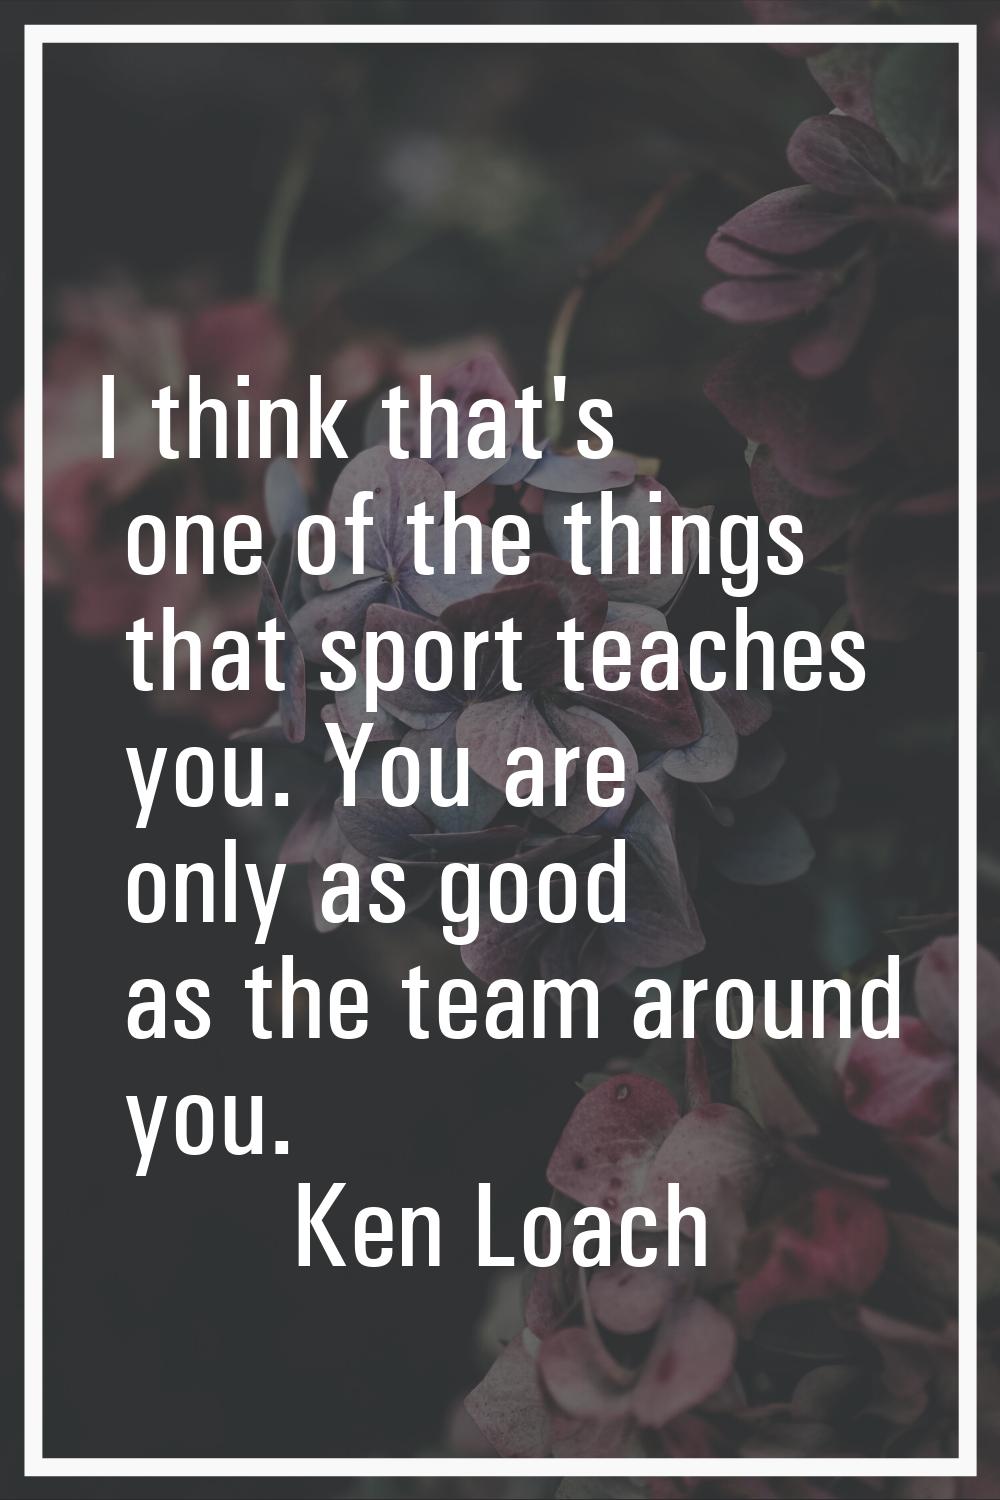 I think that's one of the things that sport teaches you. You are only as good as the team around yo